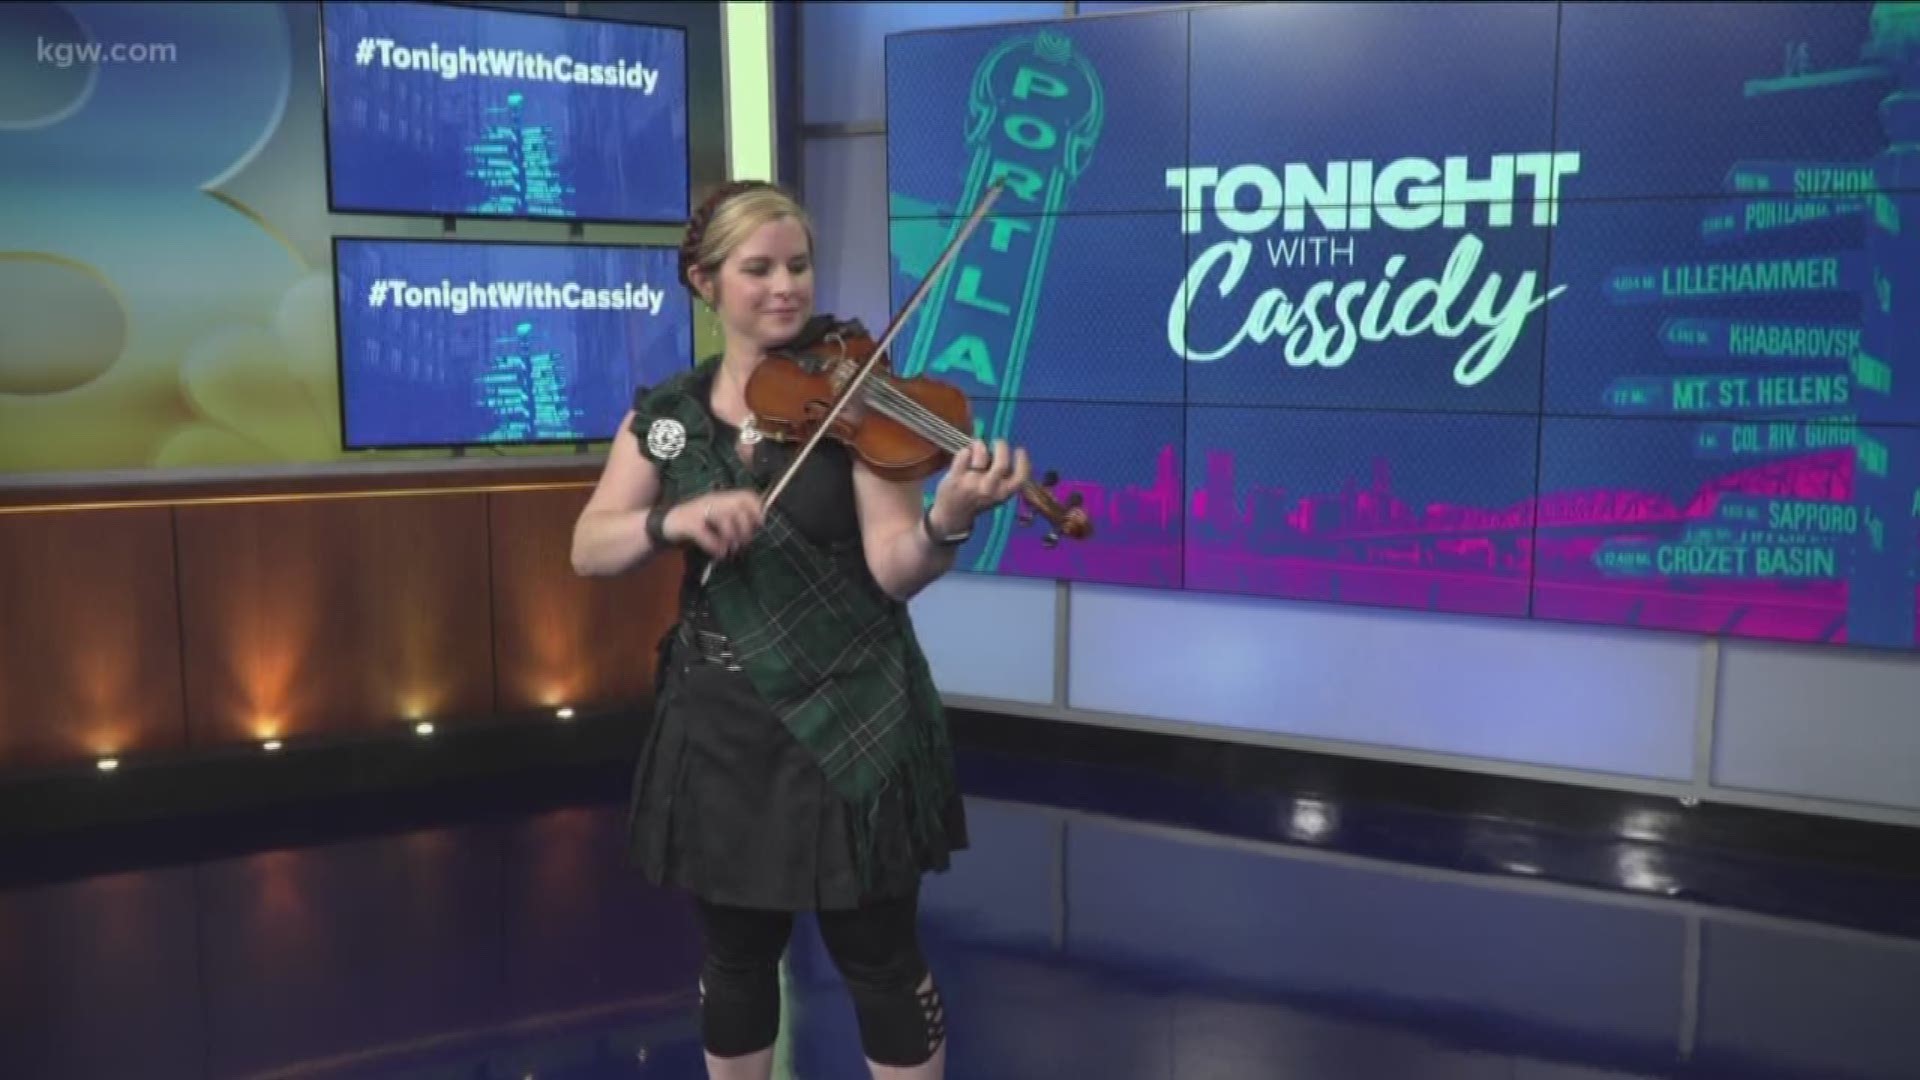 You can enjoy live music and the fiddle competition at the Portland Highland Games on Saturday July 20th.
phga.org
#TonightwithCassidy